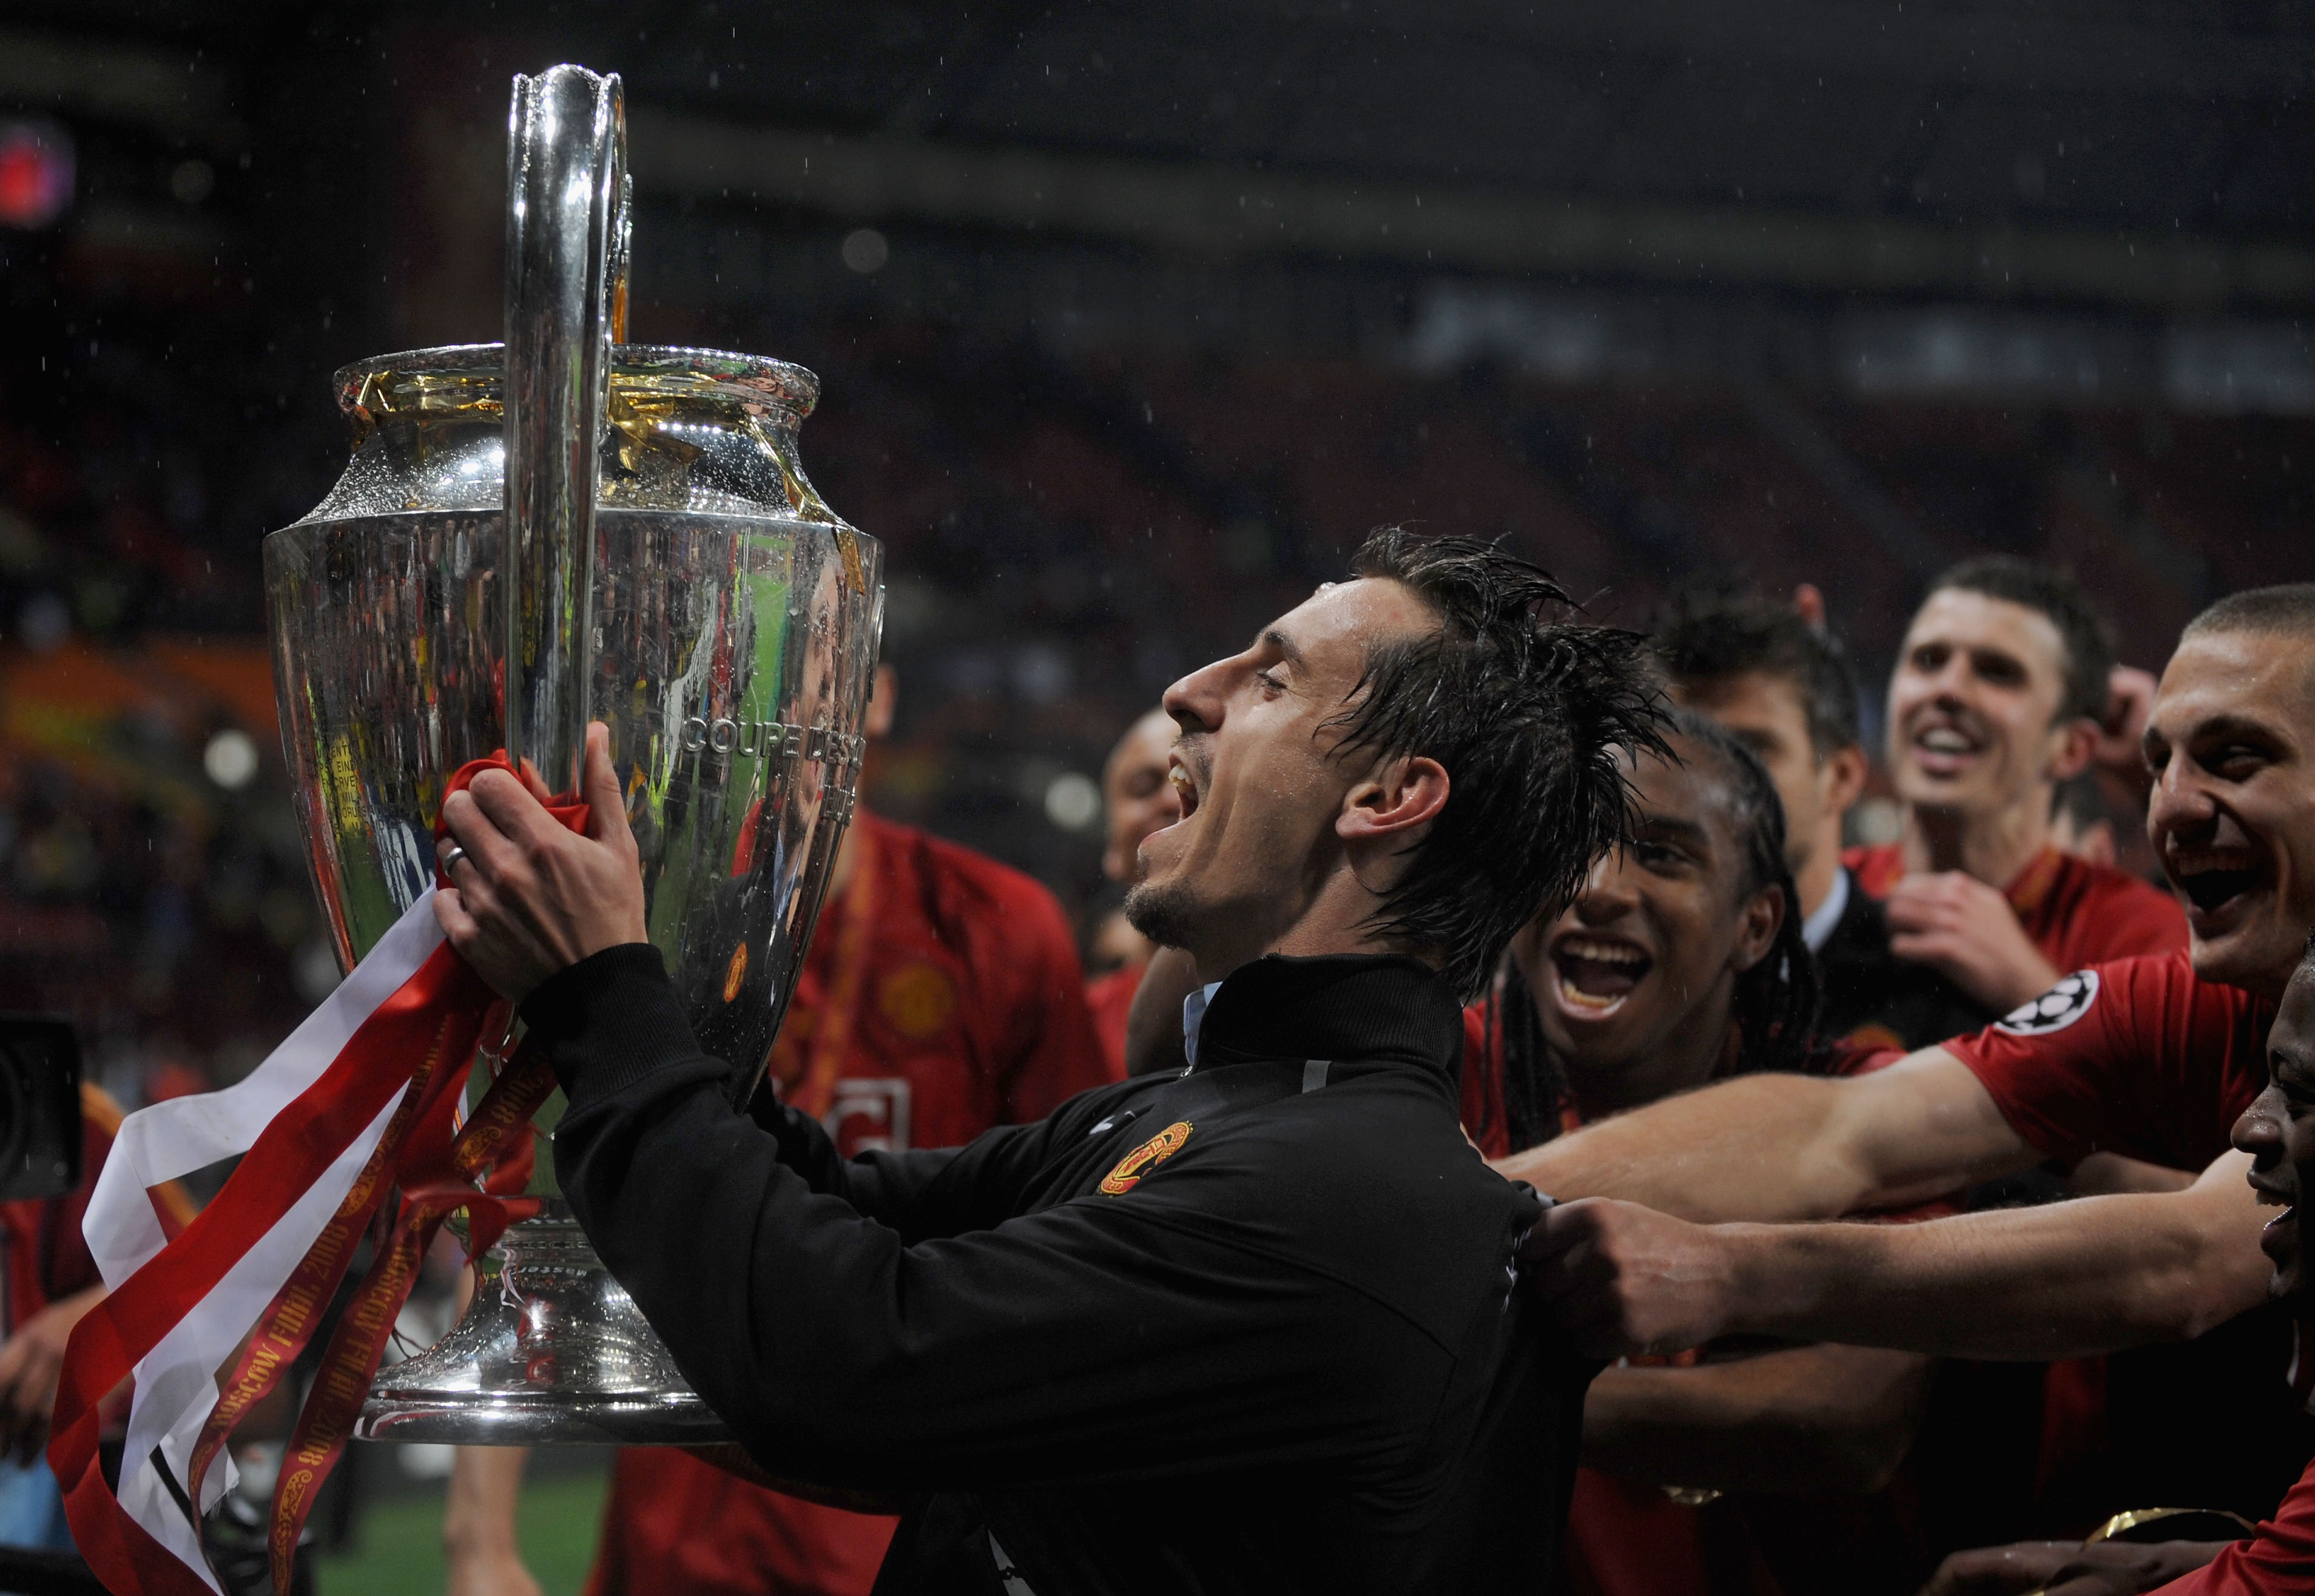 MOSCOW - MAY 21: Gary Neville of Manchester United lifts the trophy during the UEFA Champions League Final match between Manchester United and Chelsea at the Luzhniki Stadium on May 21, 2008 in Moscow, Russia.  (Photo by Shaun Botterill/Getty Images)